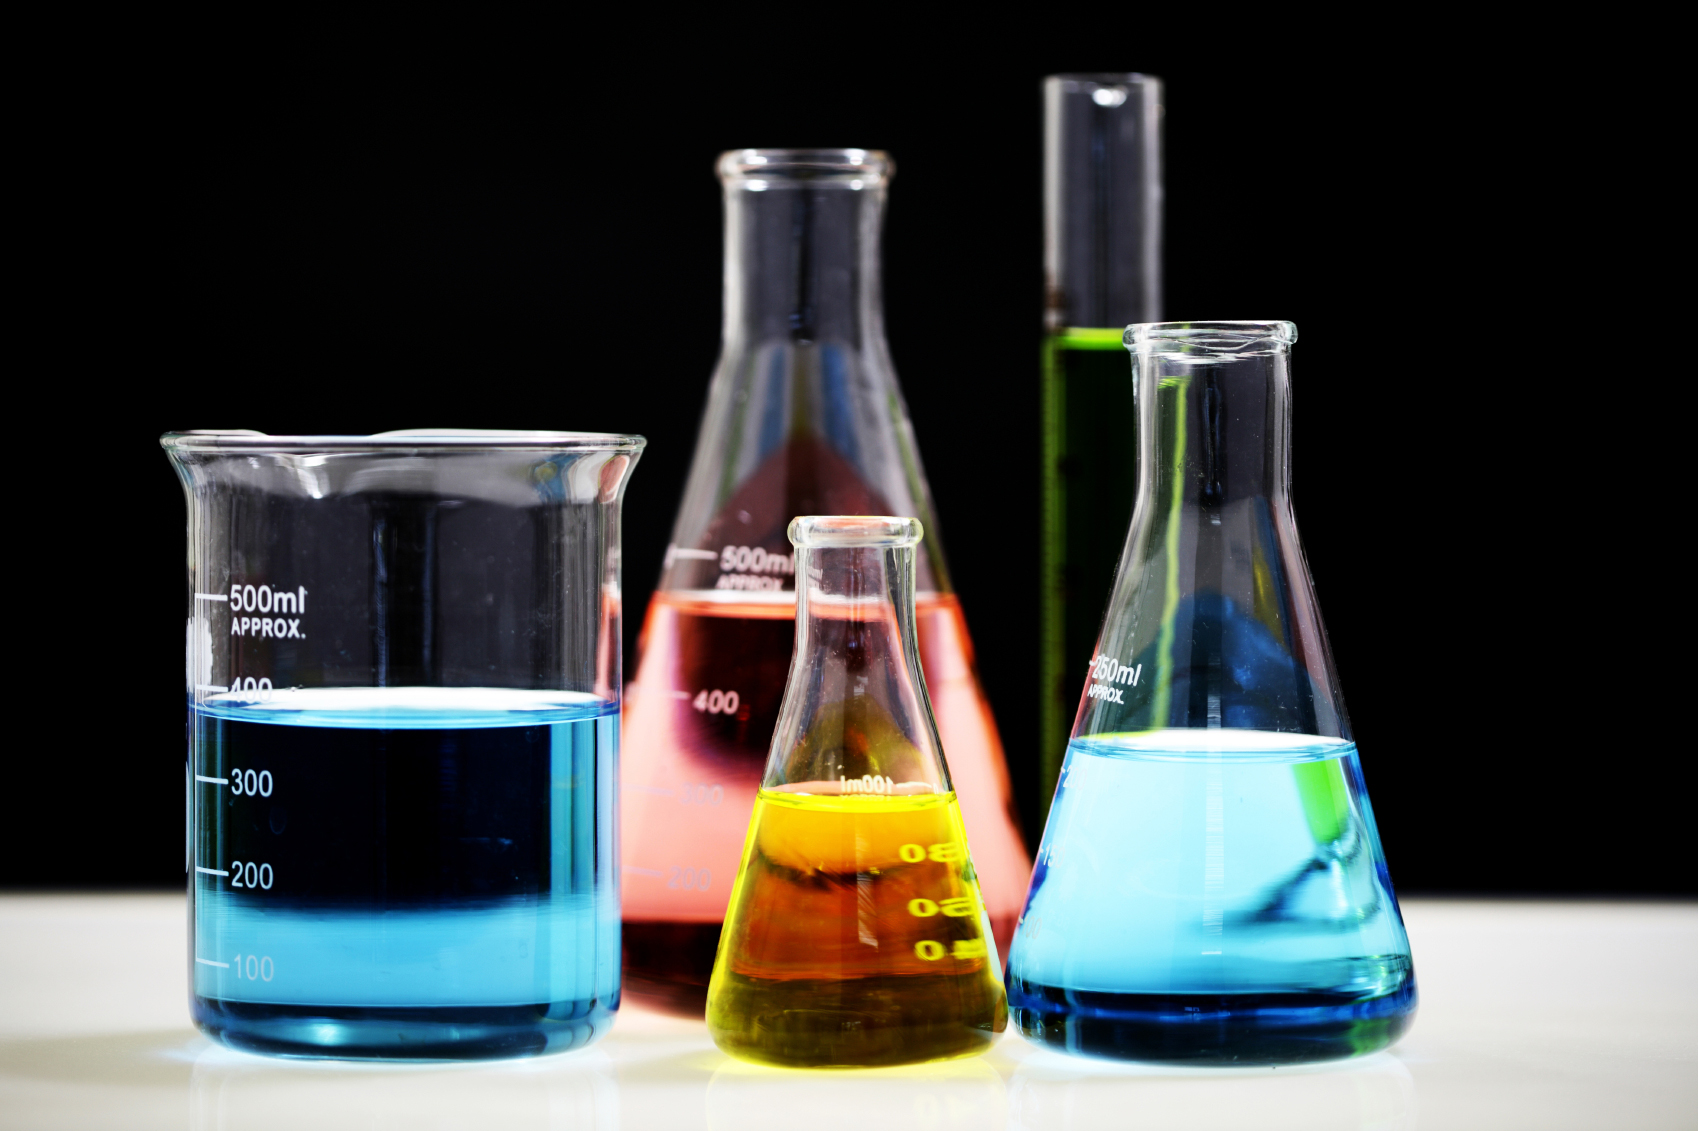 Global Acetic Aldehyde Market: Industry Analysis and Forecast (2020-2026)